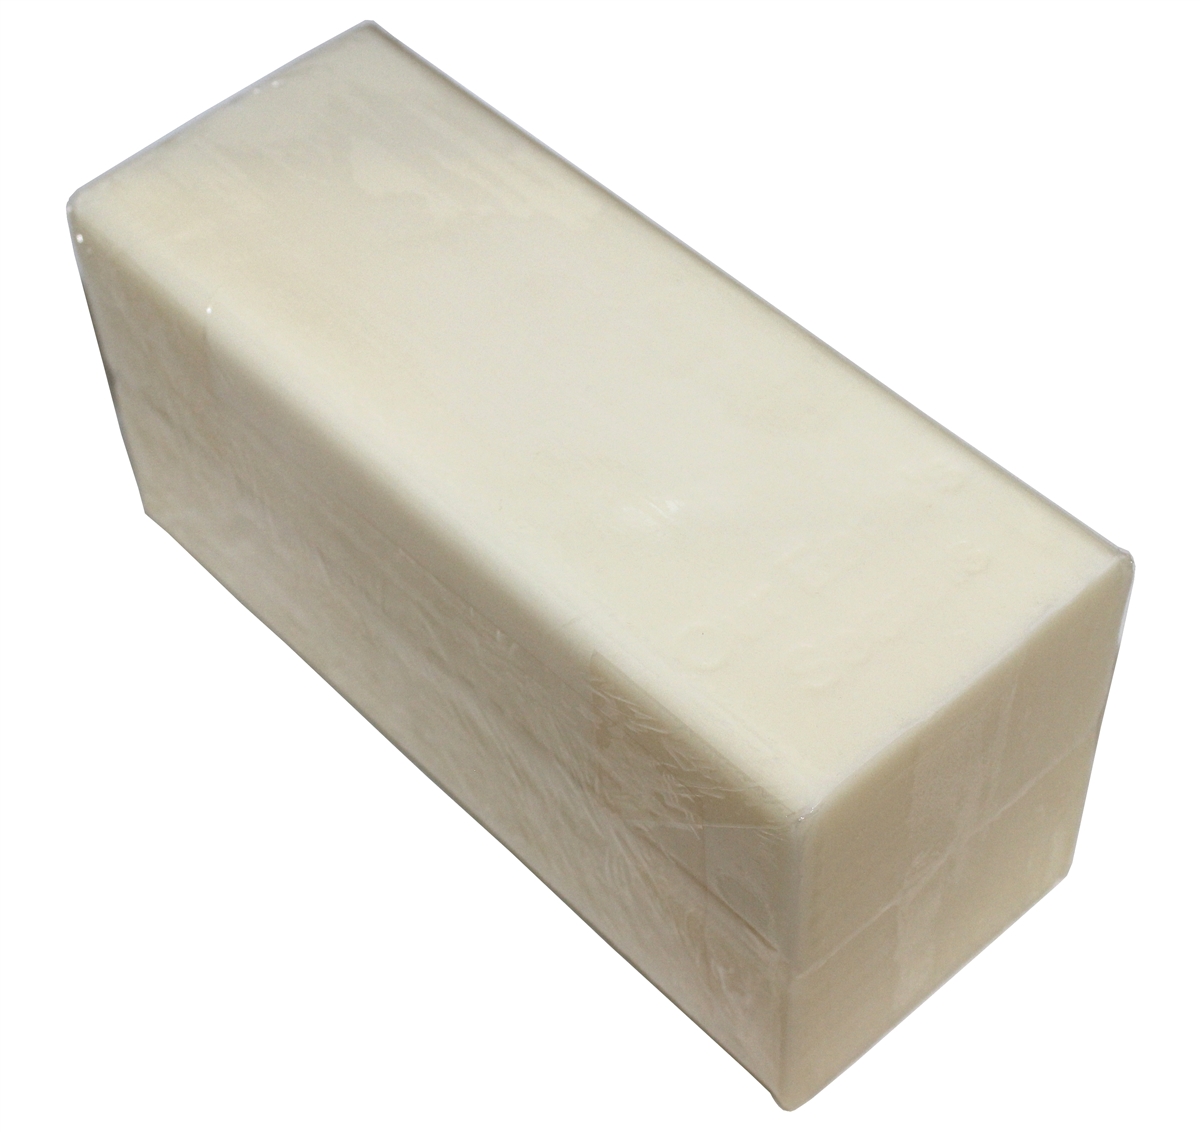 Virginia Candle Supply Oatmeal Melt and Pour Soap Base 2 Pound Block